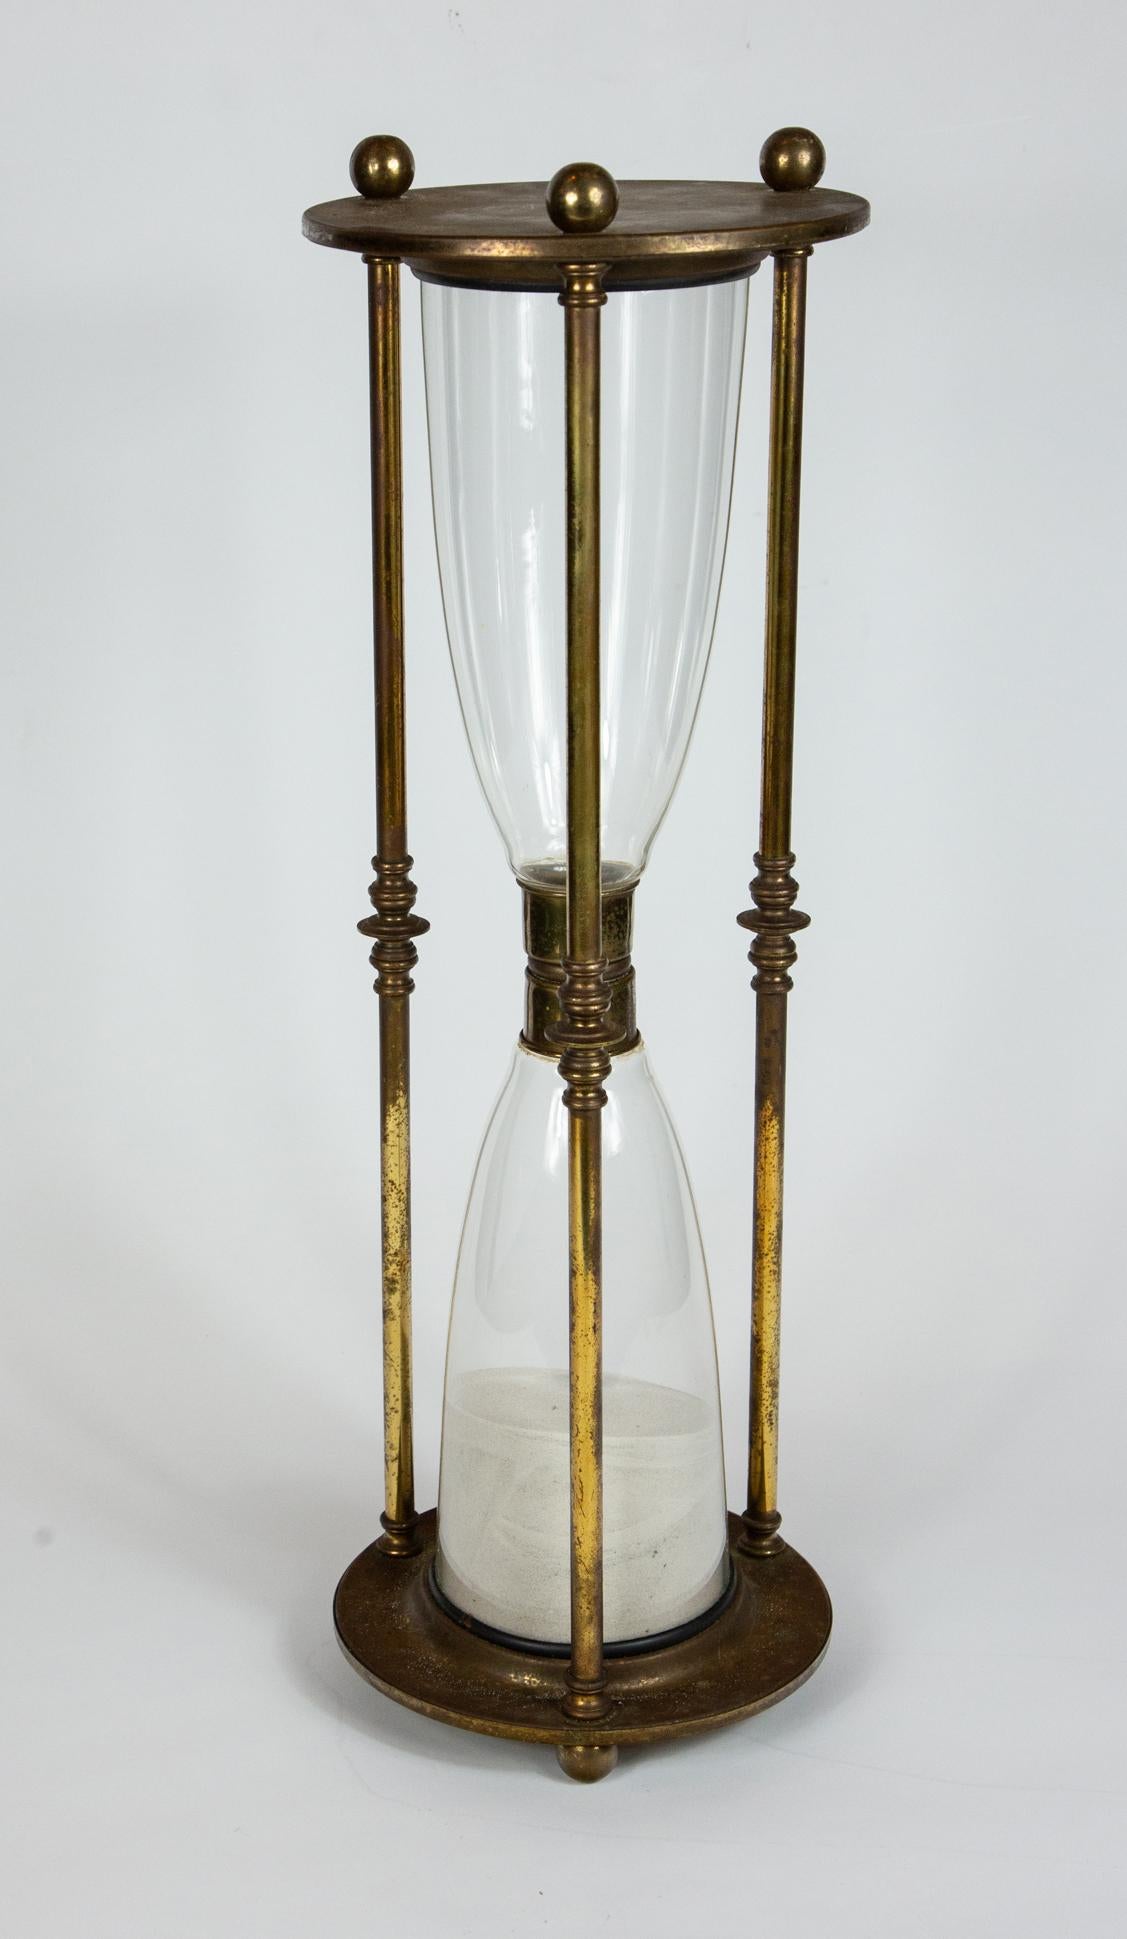 Large vintage brass hourglass. Midcentury, with three round feet on top and bottom.

Measures: 8.5